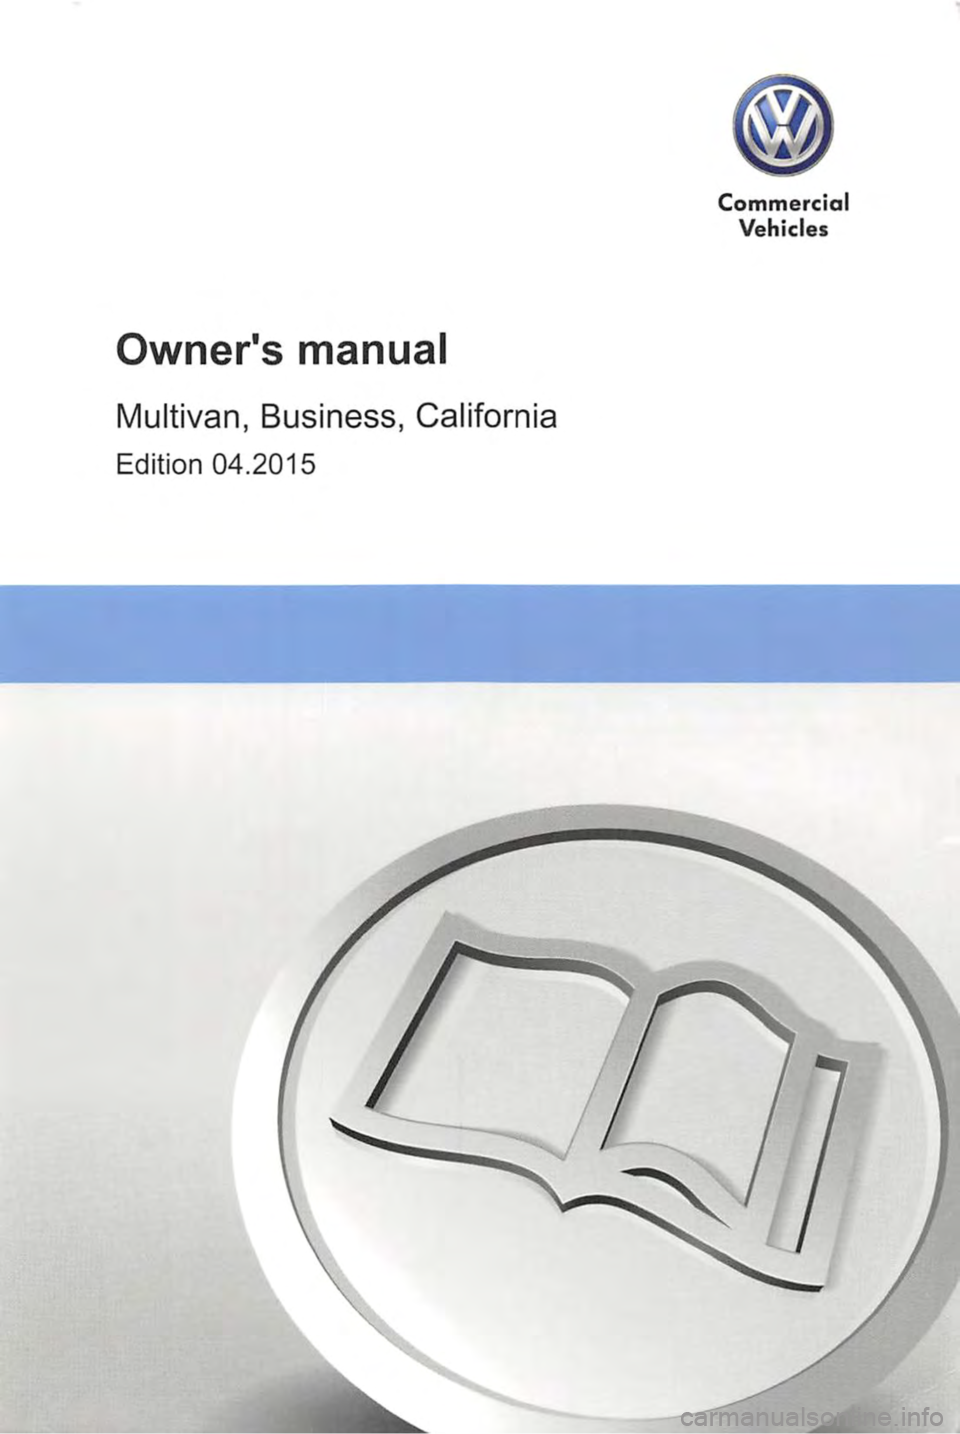 VOLKSWAGEN TRANSPORTER 2015  Owner´s Manual Owners manual 
Multivan, Business, California 
Edition 04.2015 
Commercial 
Vehicles  